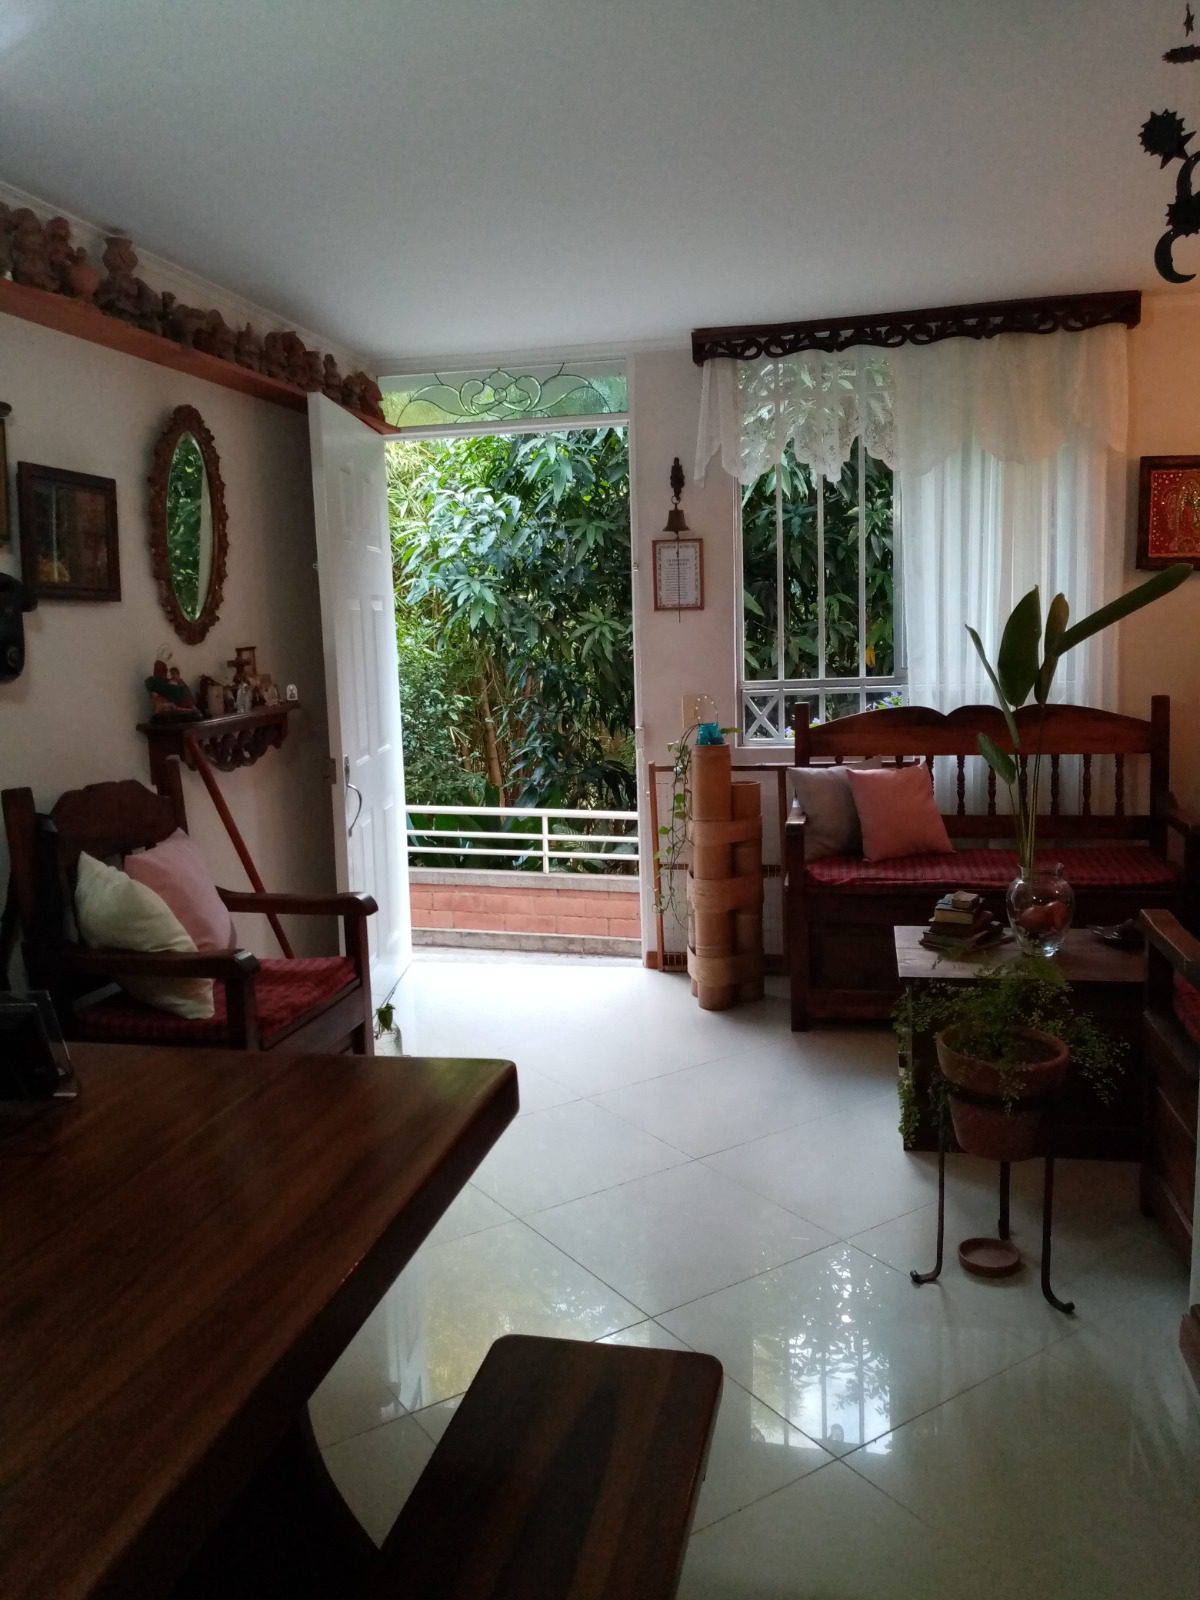 4BR, Three-Level Gated Community Home In Belen (Medellin) With Low Carrying Costs